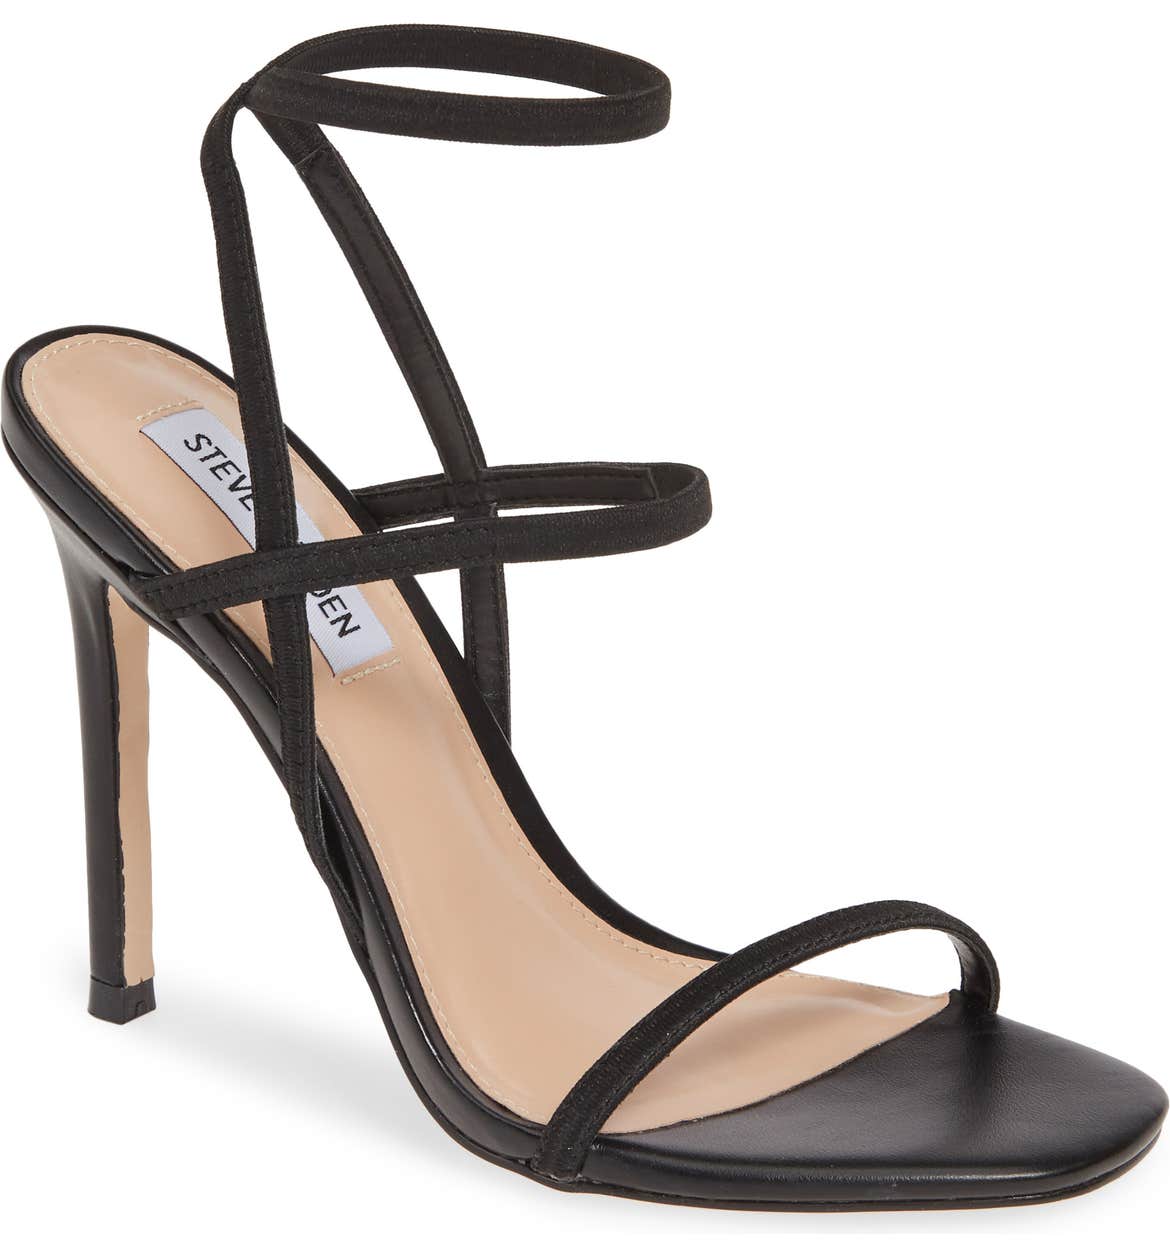 15 great minimalist sandals that go from work to play - Good Morning ...